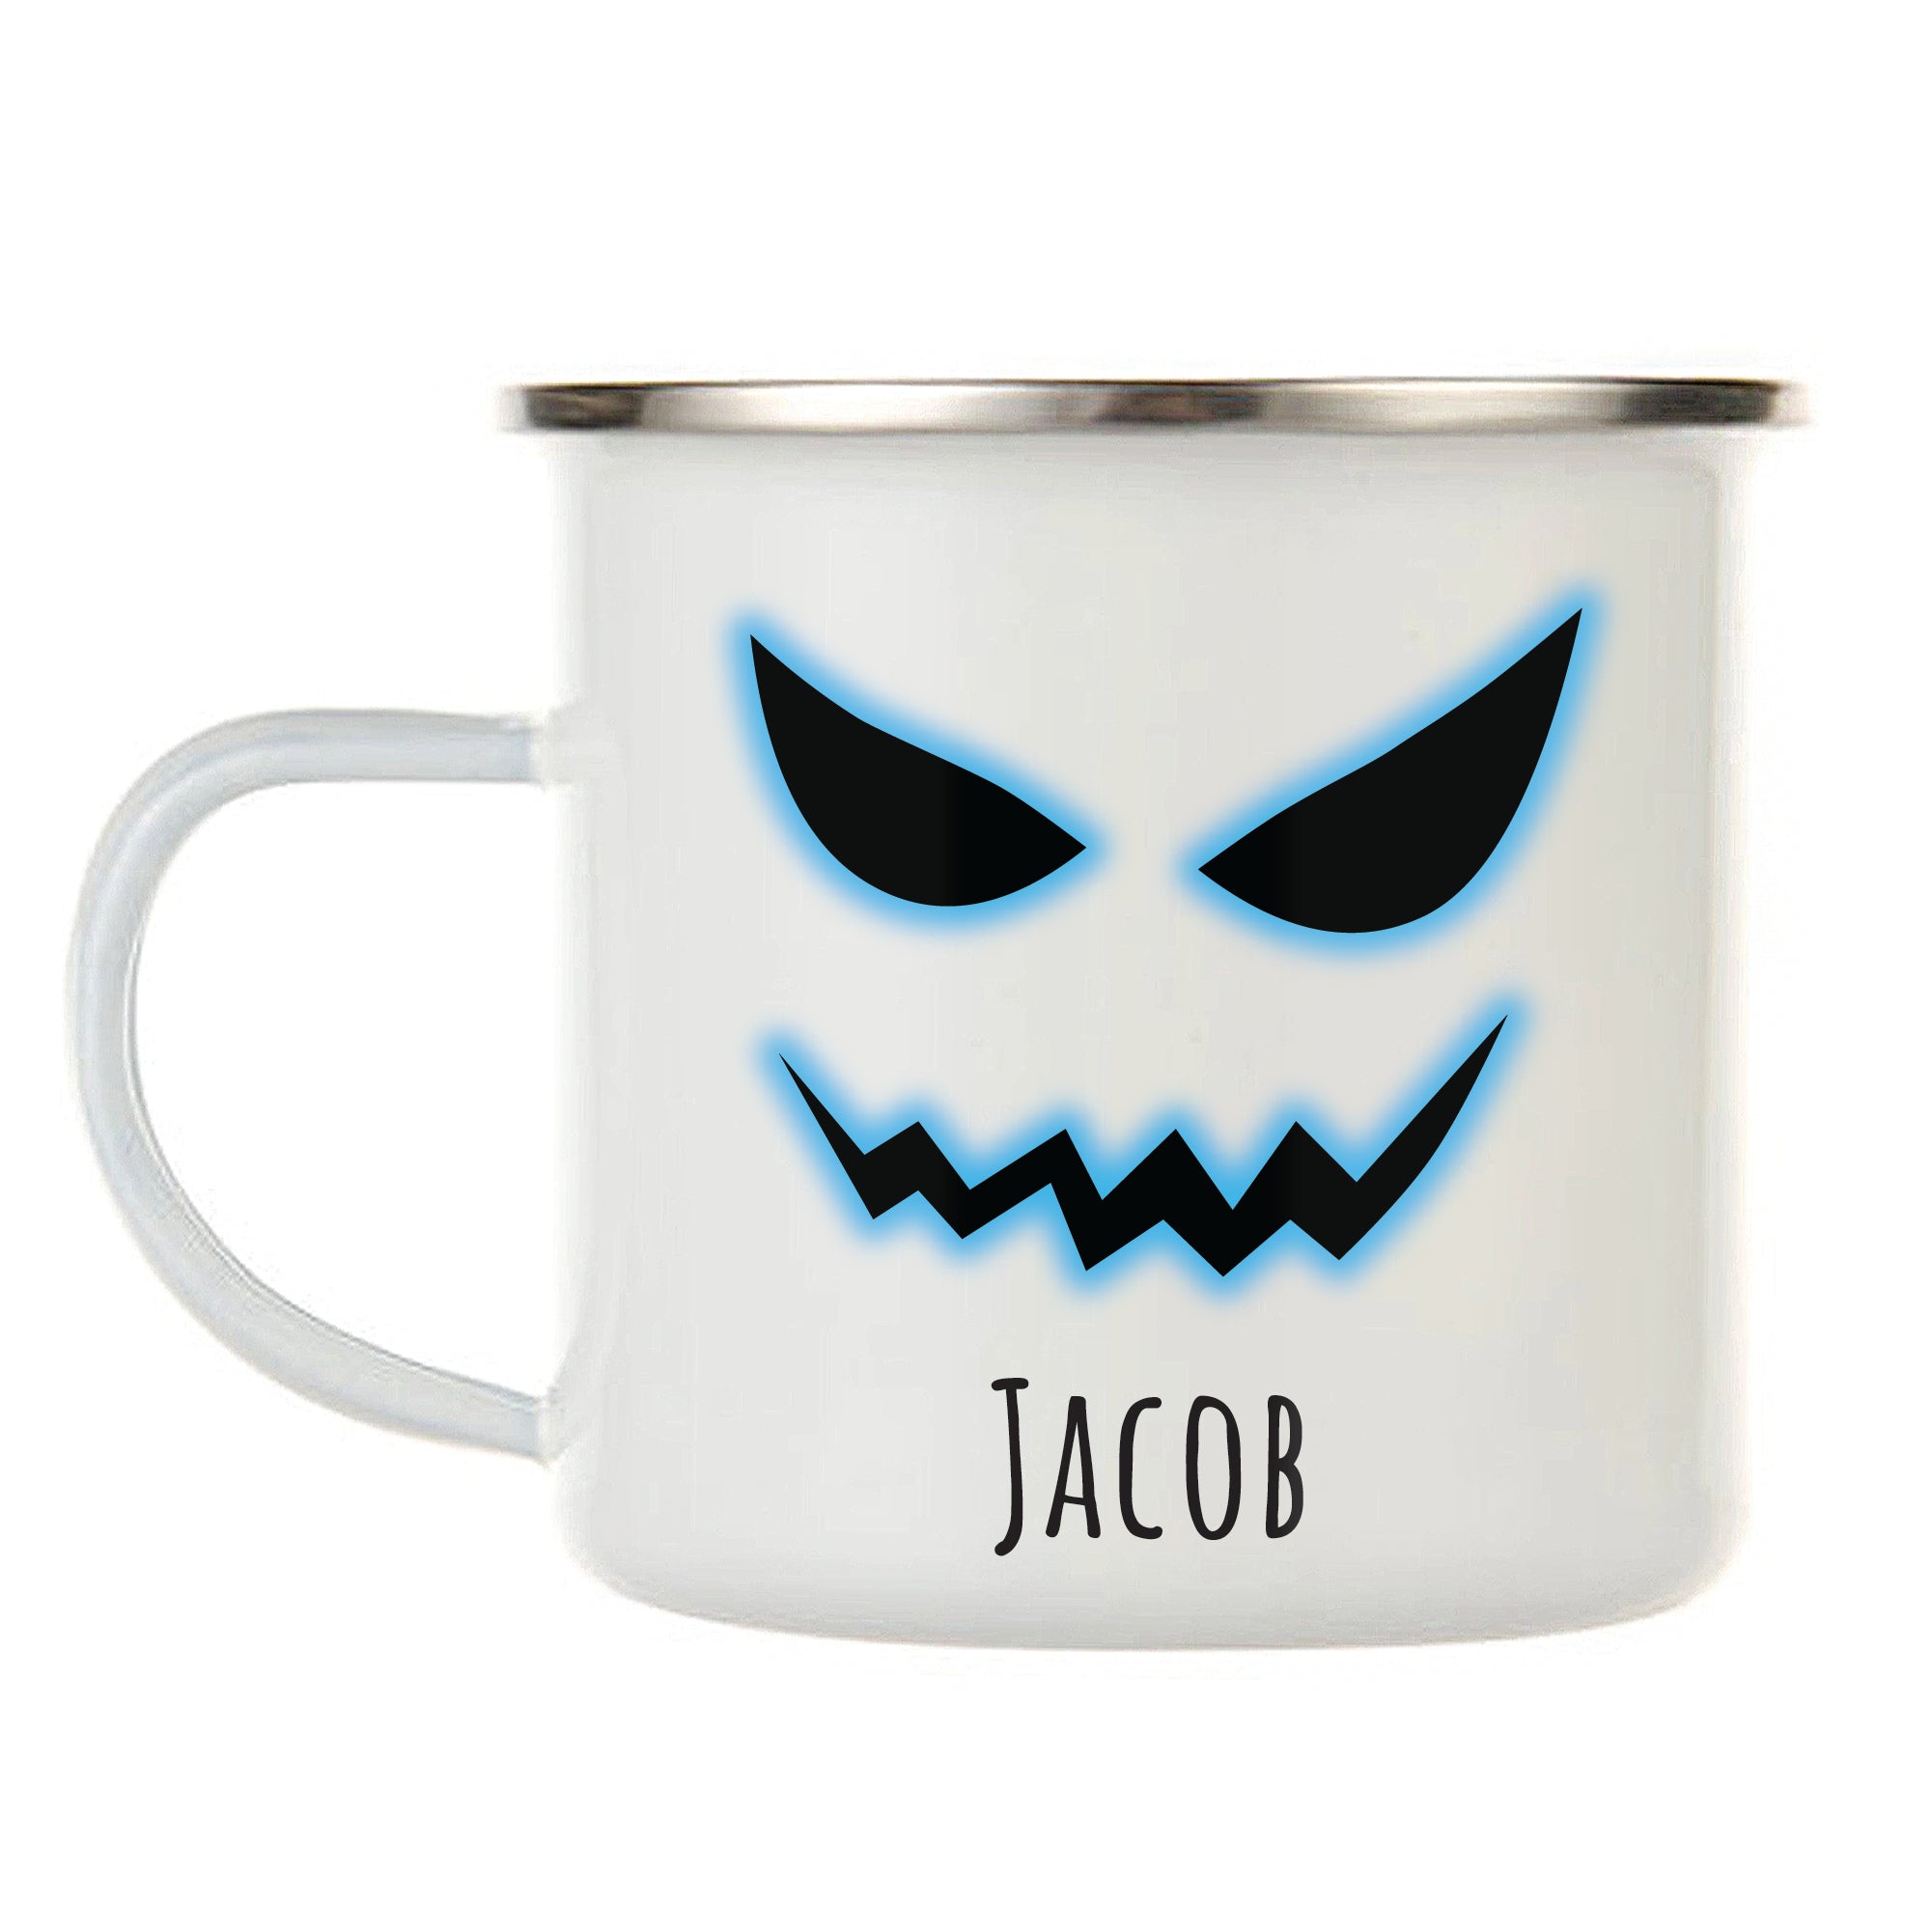 Kids Personalized 12 oz. Stainless Steel & Enamel Camp Mug with Scary Pumpkin Face